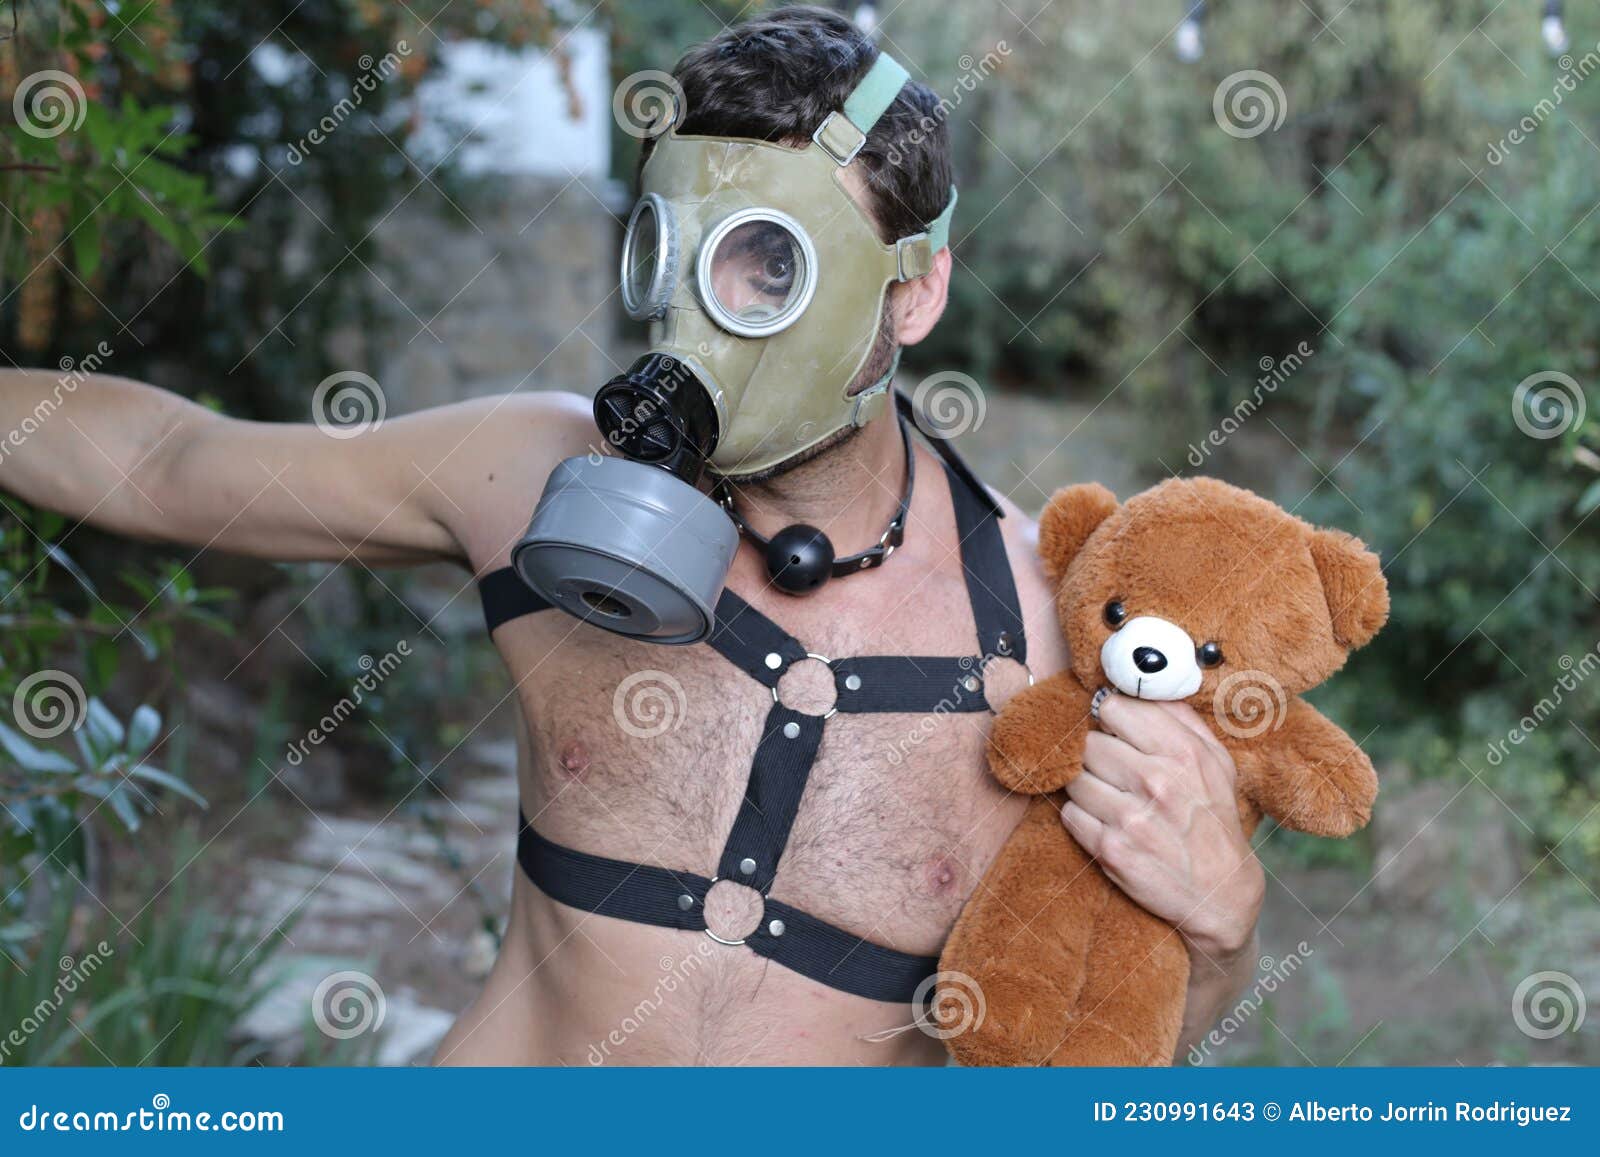 Very Man a Gas Mask and Holding a Teddy Bear Stock Image - of bdsm, dominance: 230991643